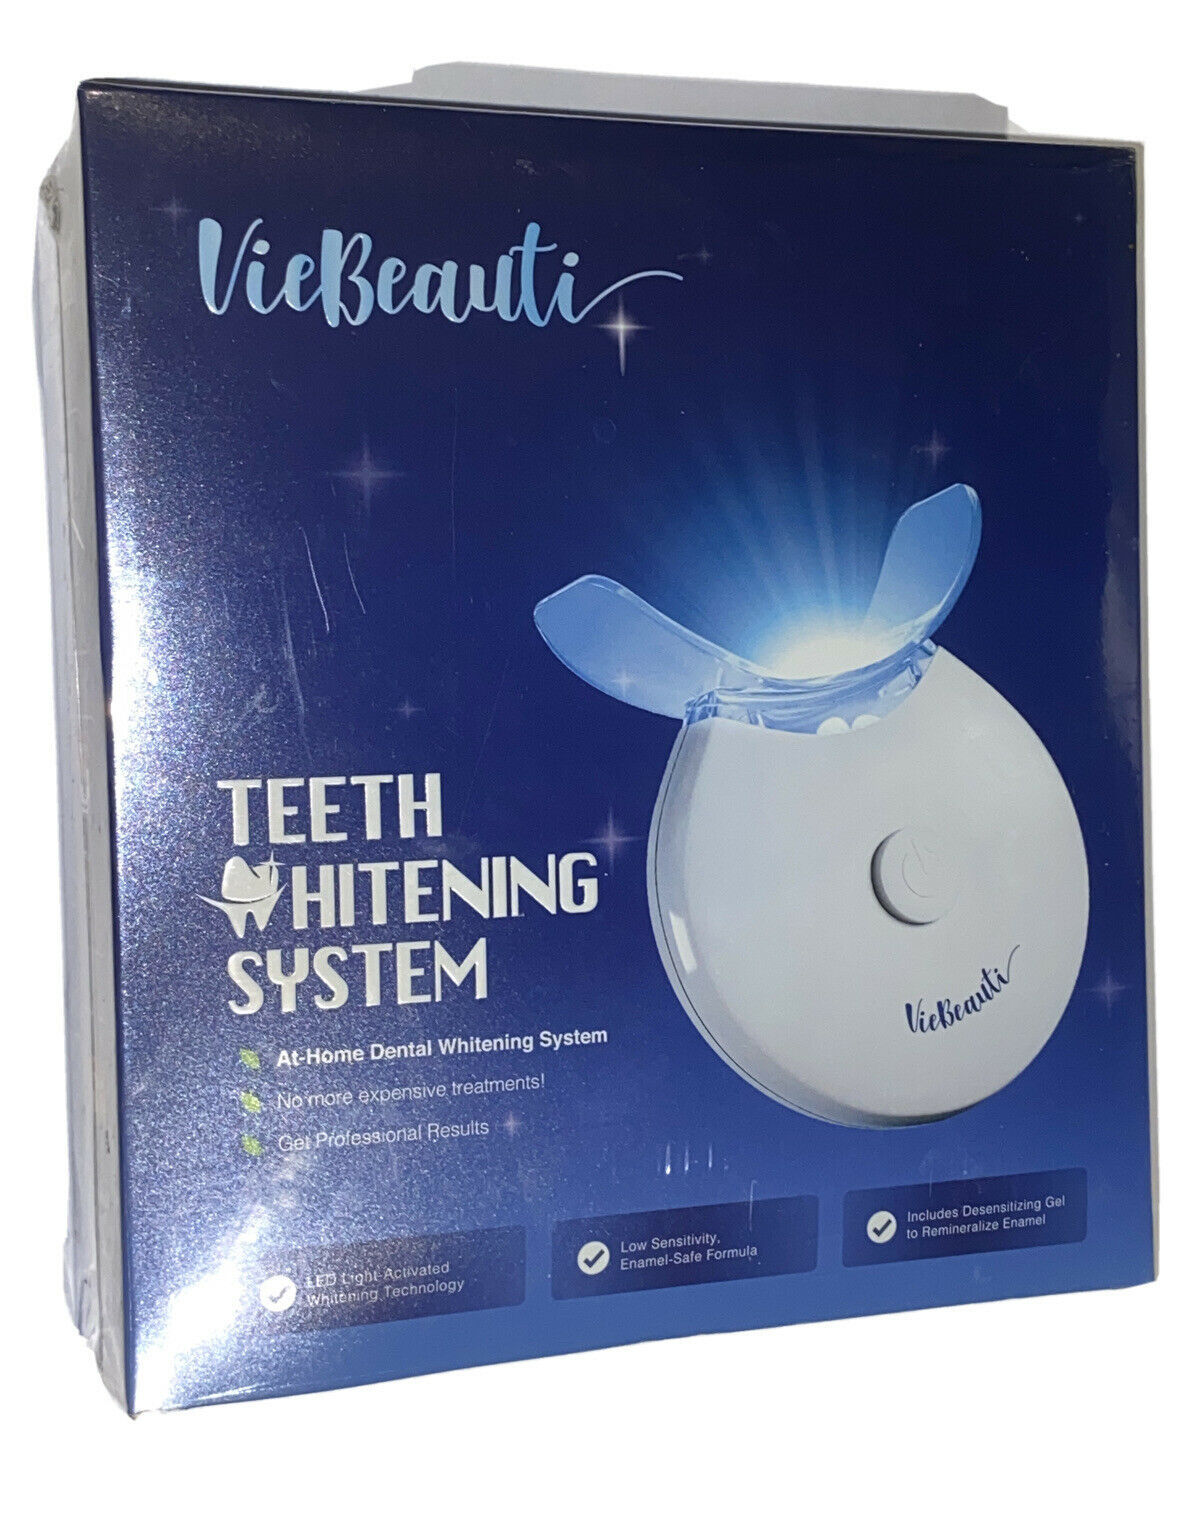 Primary image for VieBeauti Teeth Whitening System at Home Dental Whitening System - 1 Kit